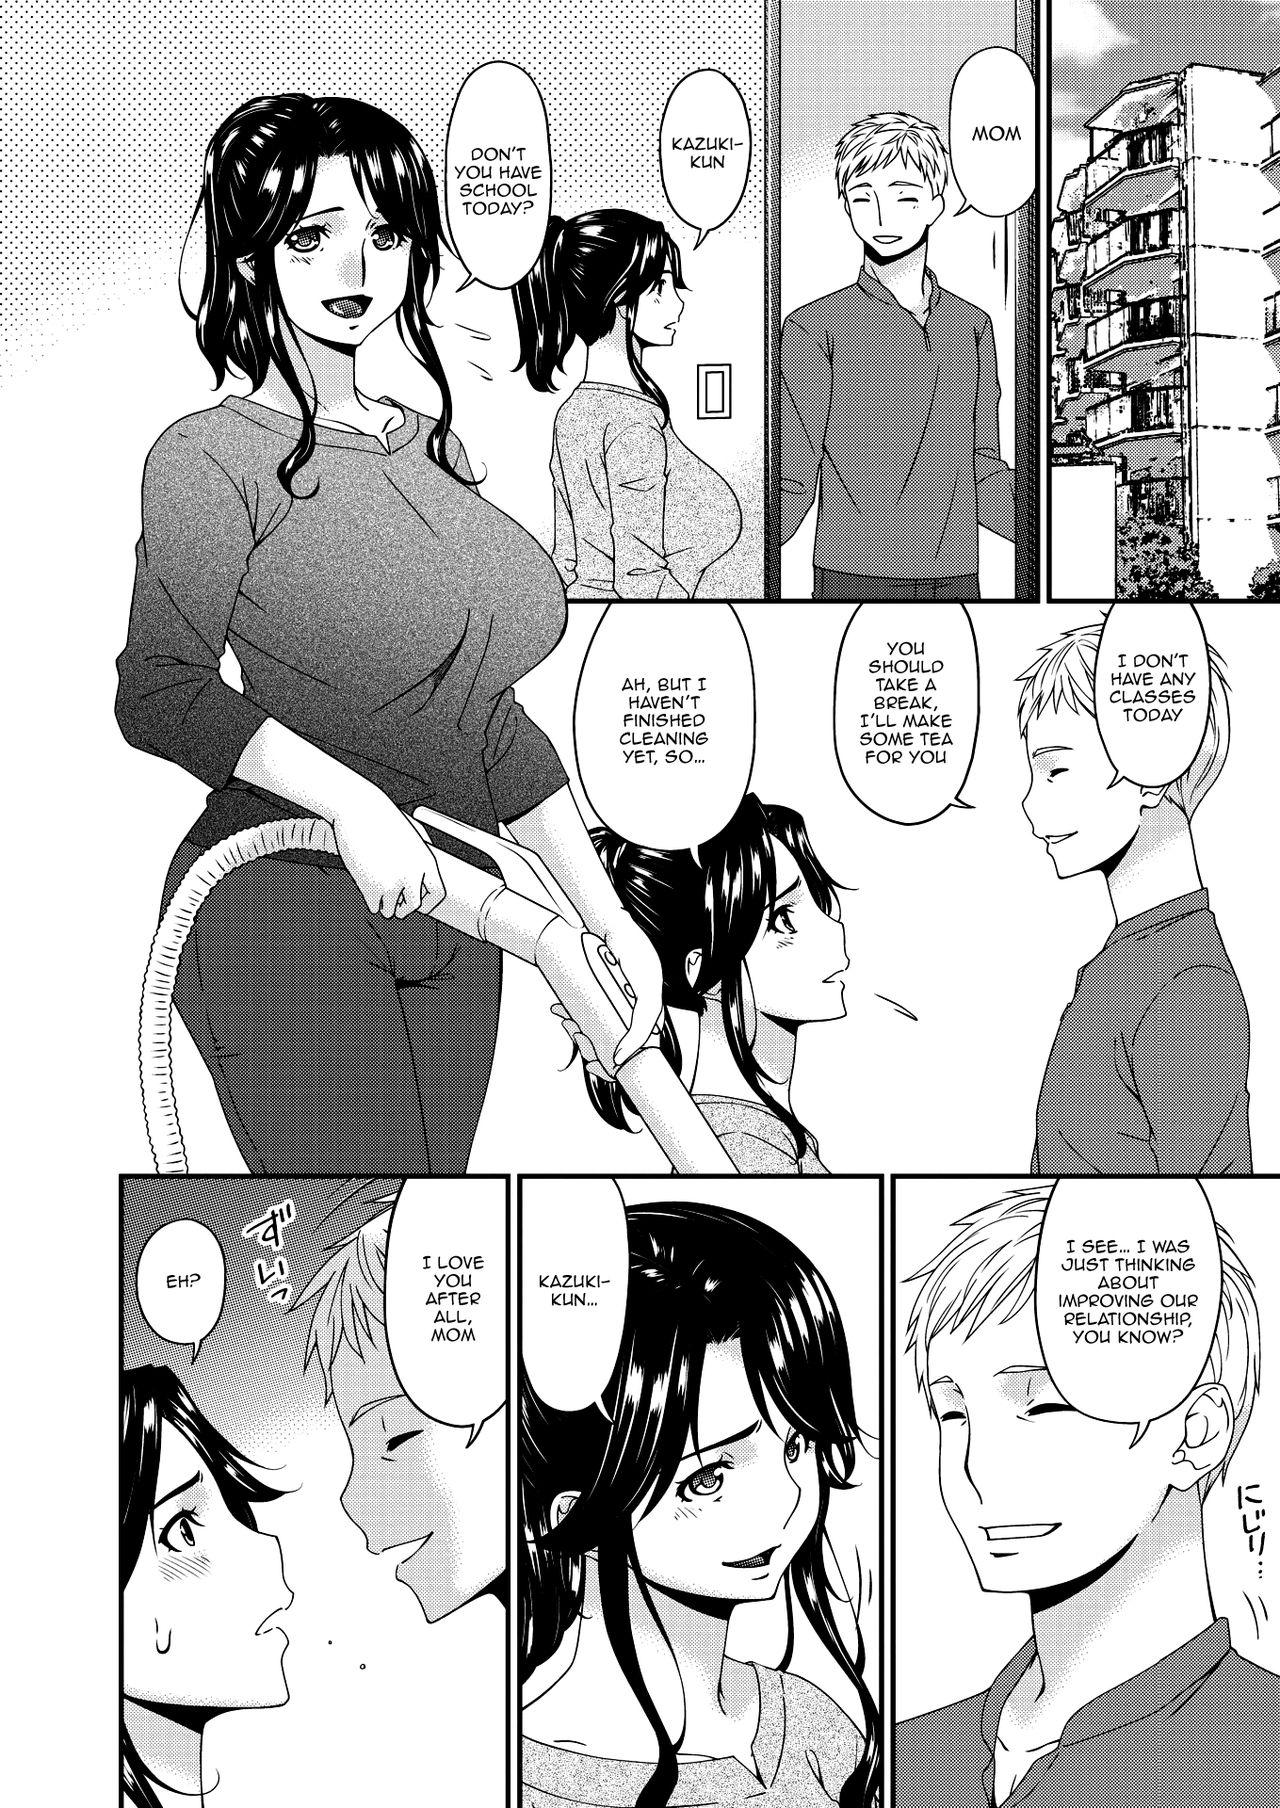 [Bai Asuka] Gibo, Omou Toki... | When I Started Thinking About My Mother-In-Law... (COMIC HOTMILK 2020-04) [English] {Doujins.com} [Digital] 7